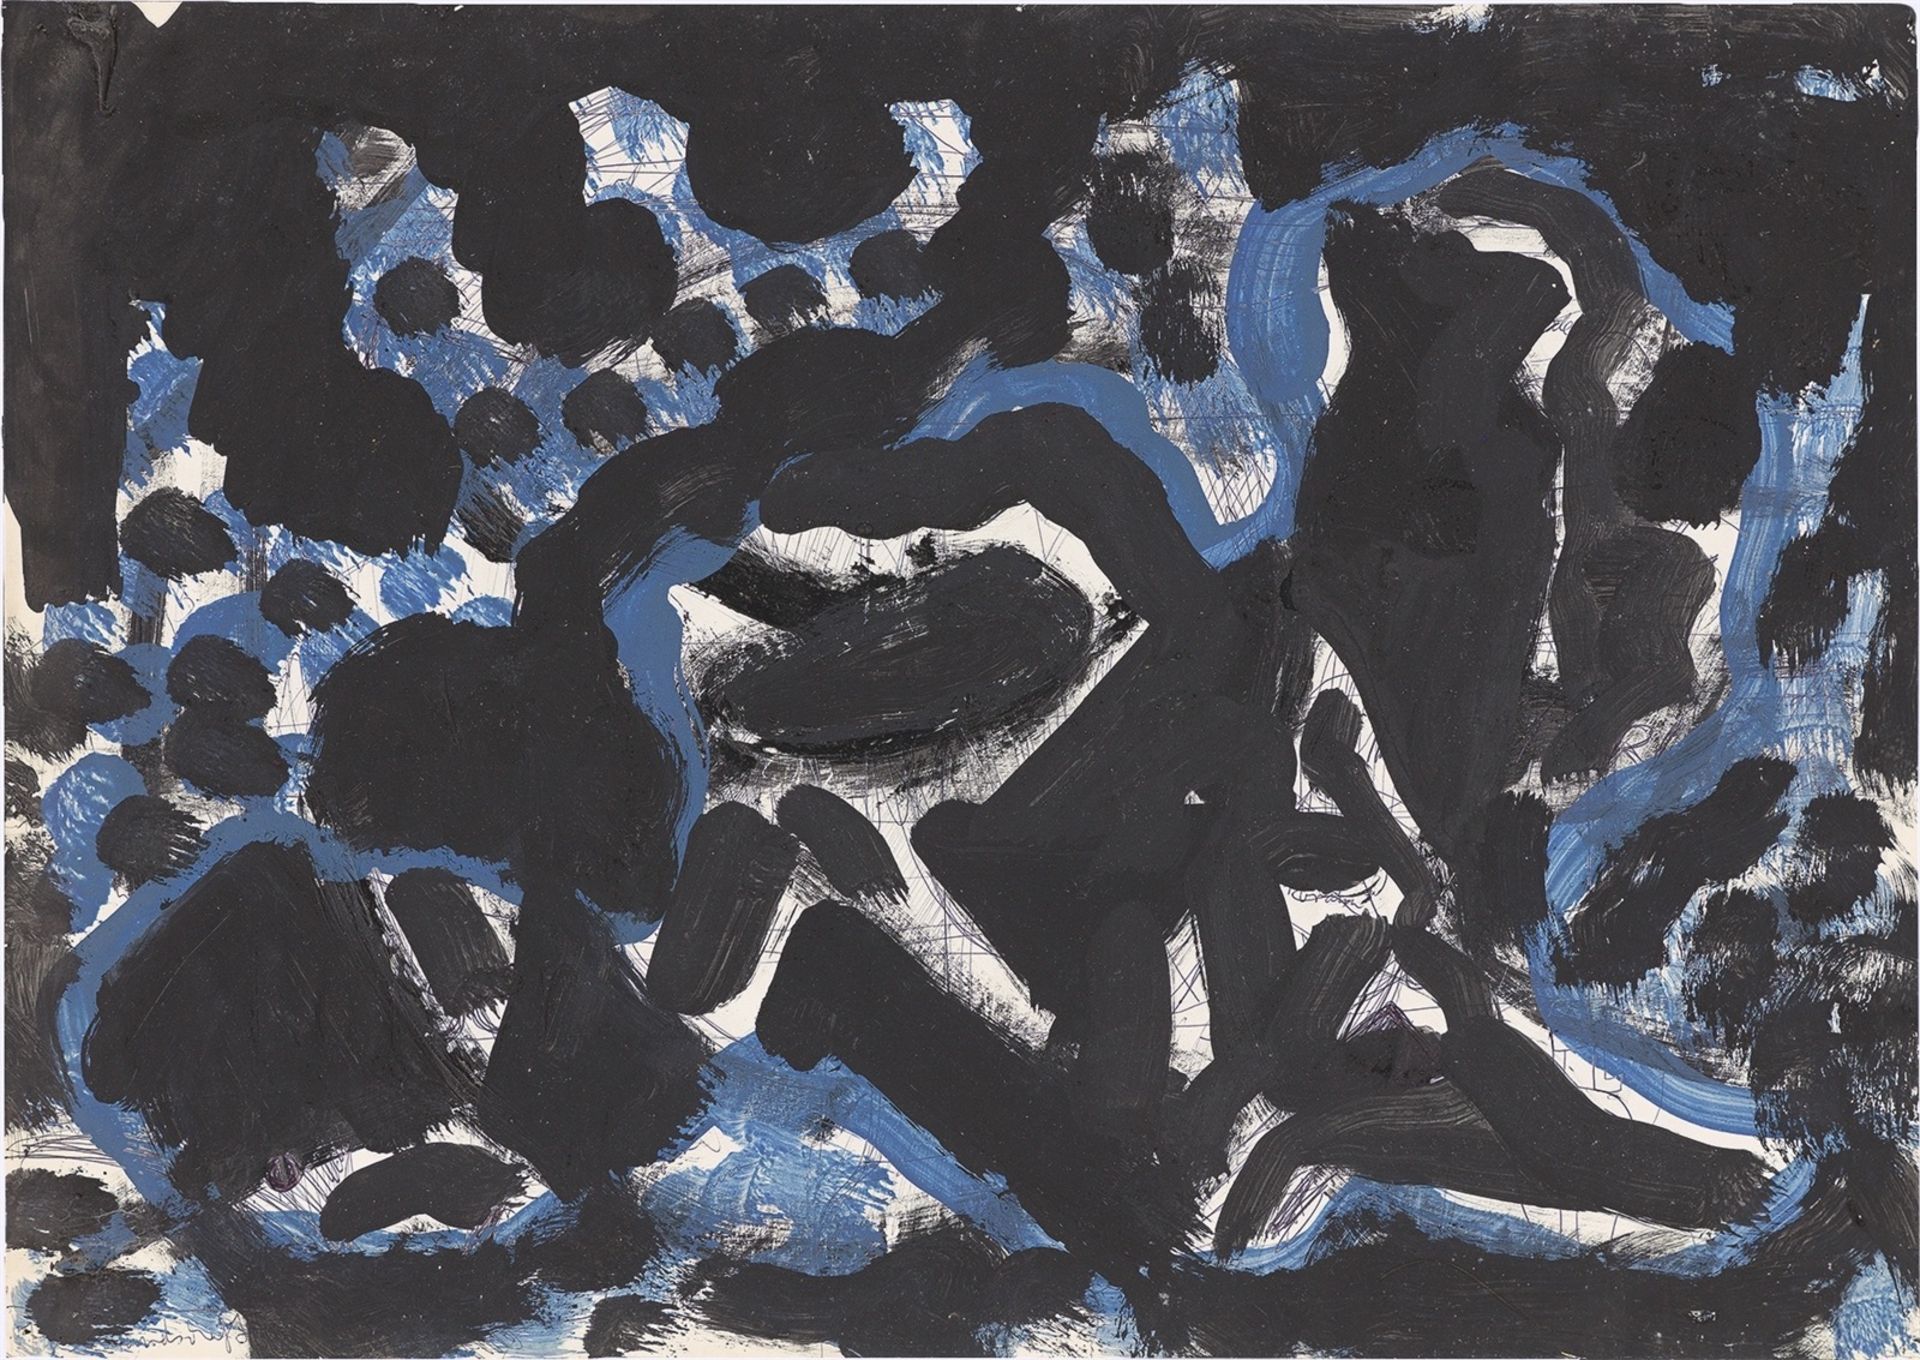 A.R. Penck. Untitled. 1975/76 - Image 7 of 10